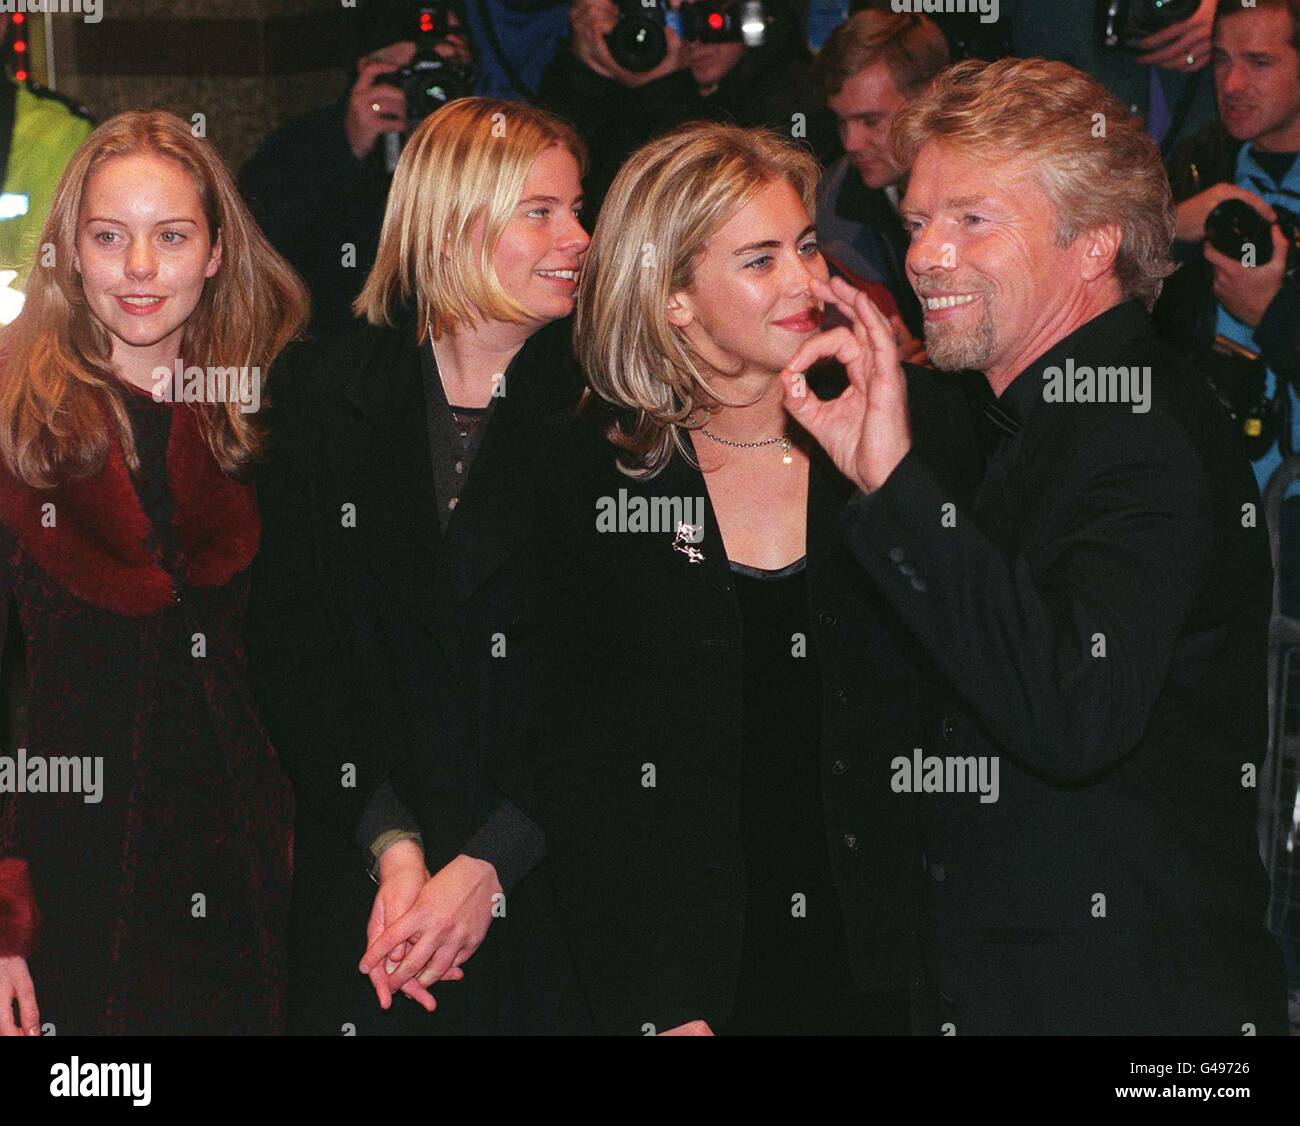 Virgin boss Richard Branson arrives with daughter Holly at the Empire, Leicester Square, for tonight's (Monday) Royal gala premiere of the film Spice - The Movie, which was attended by the Prince of Wales and the young princes Harry and William. Photo by Stefan Rousseau/PA Stock Photo